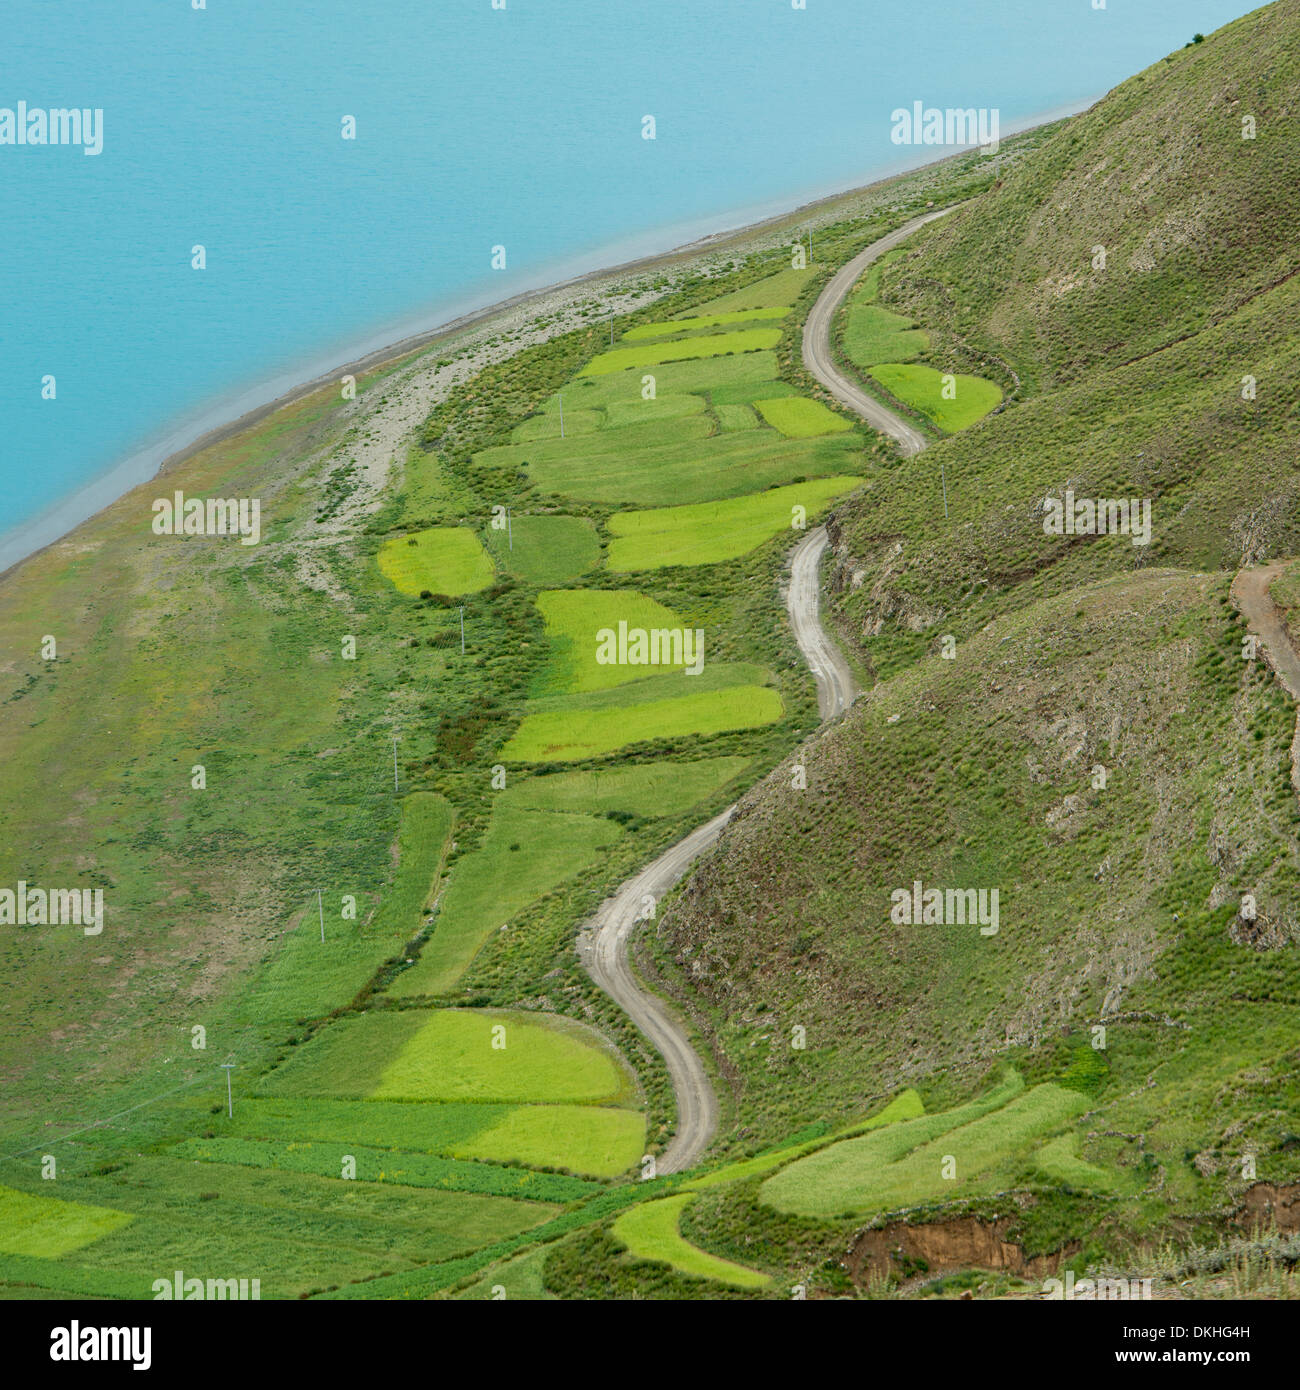 Aerial view of road passing through agricultural fields along Yamdrok Lake, Nagarze, Shannan, Tibet, China Stock Photo